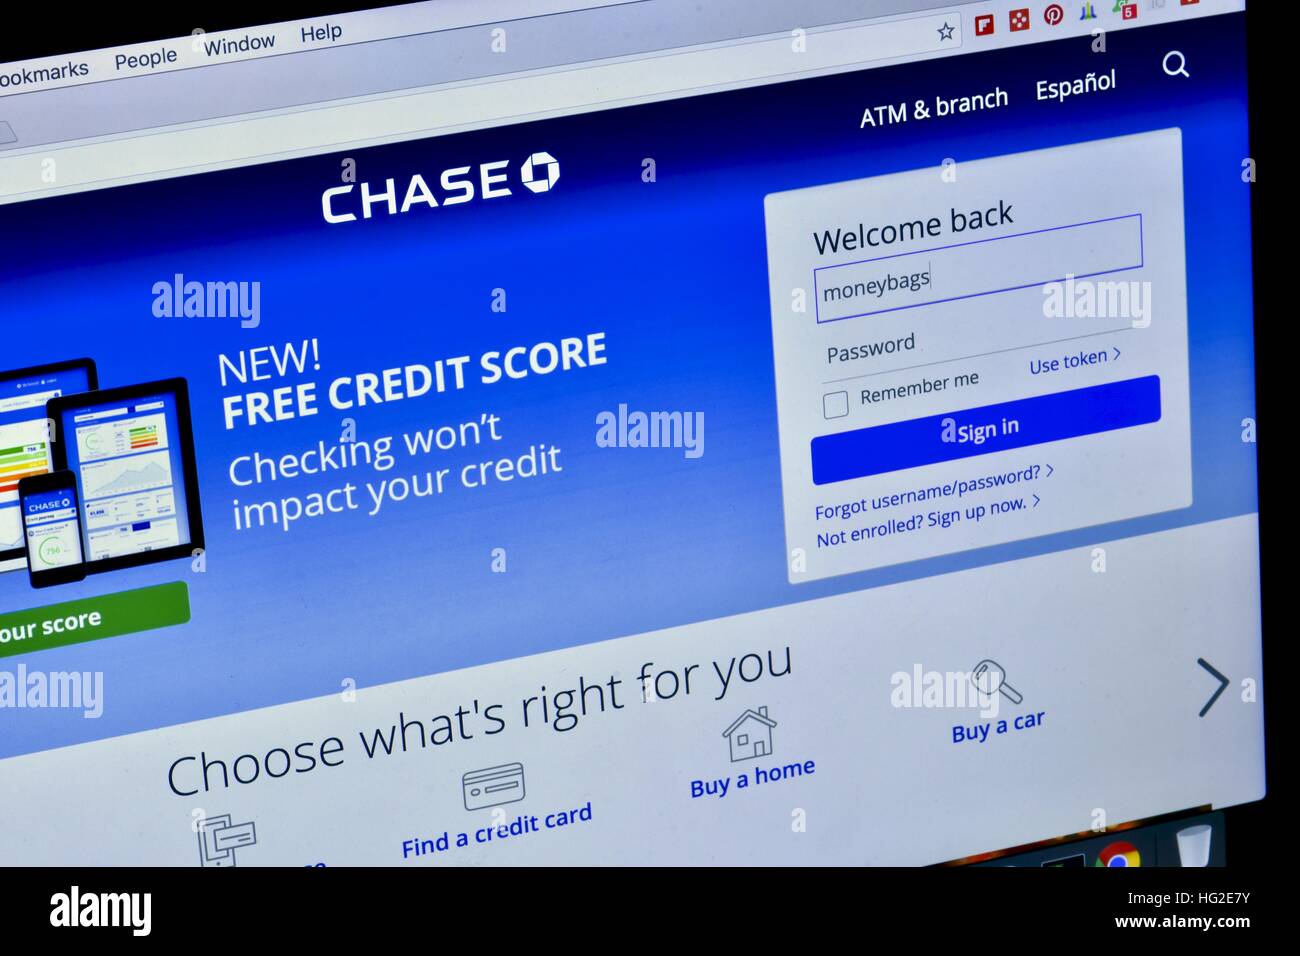 An Apple Macbook Pro displayed on a marble surface while displaying the Chase bank website Stock Photo